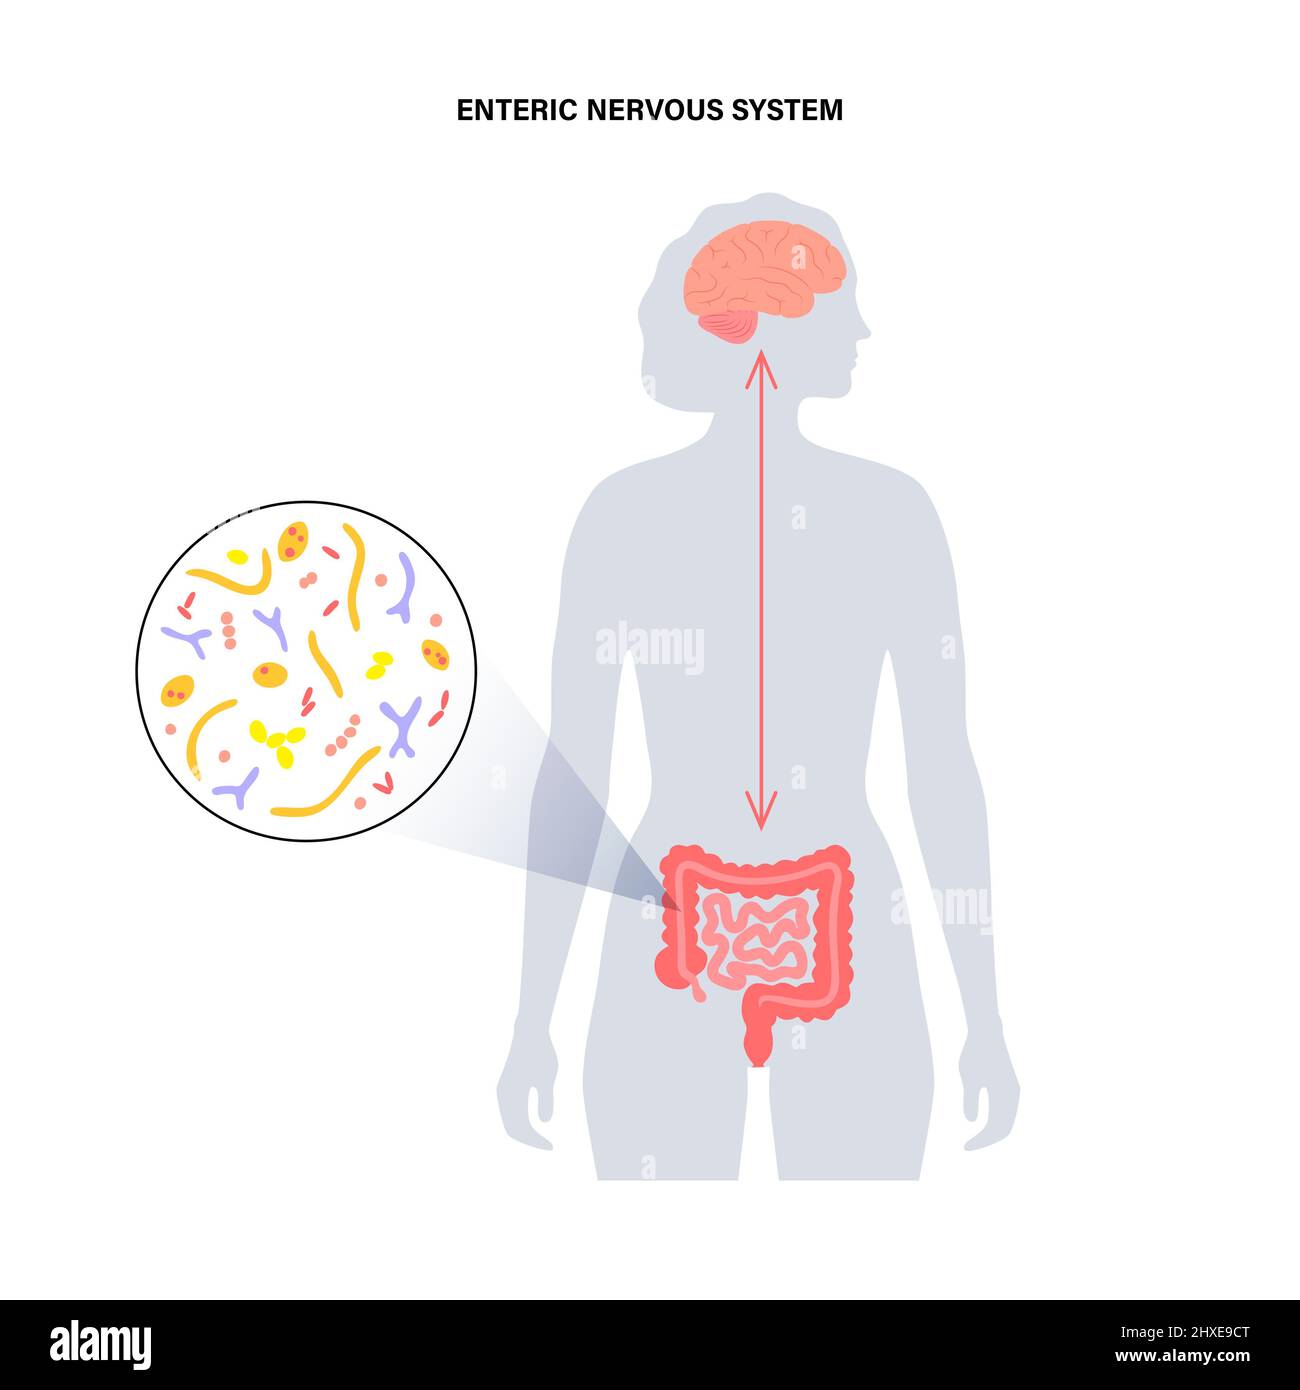 Connection between gut and brain, illustration Stock Photo